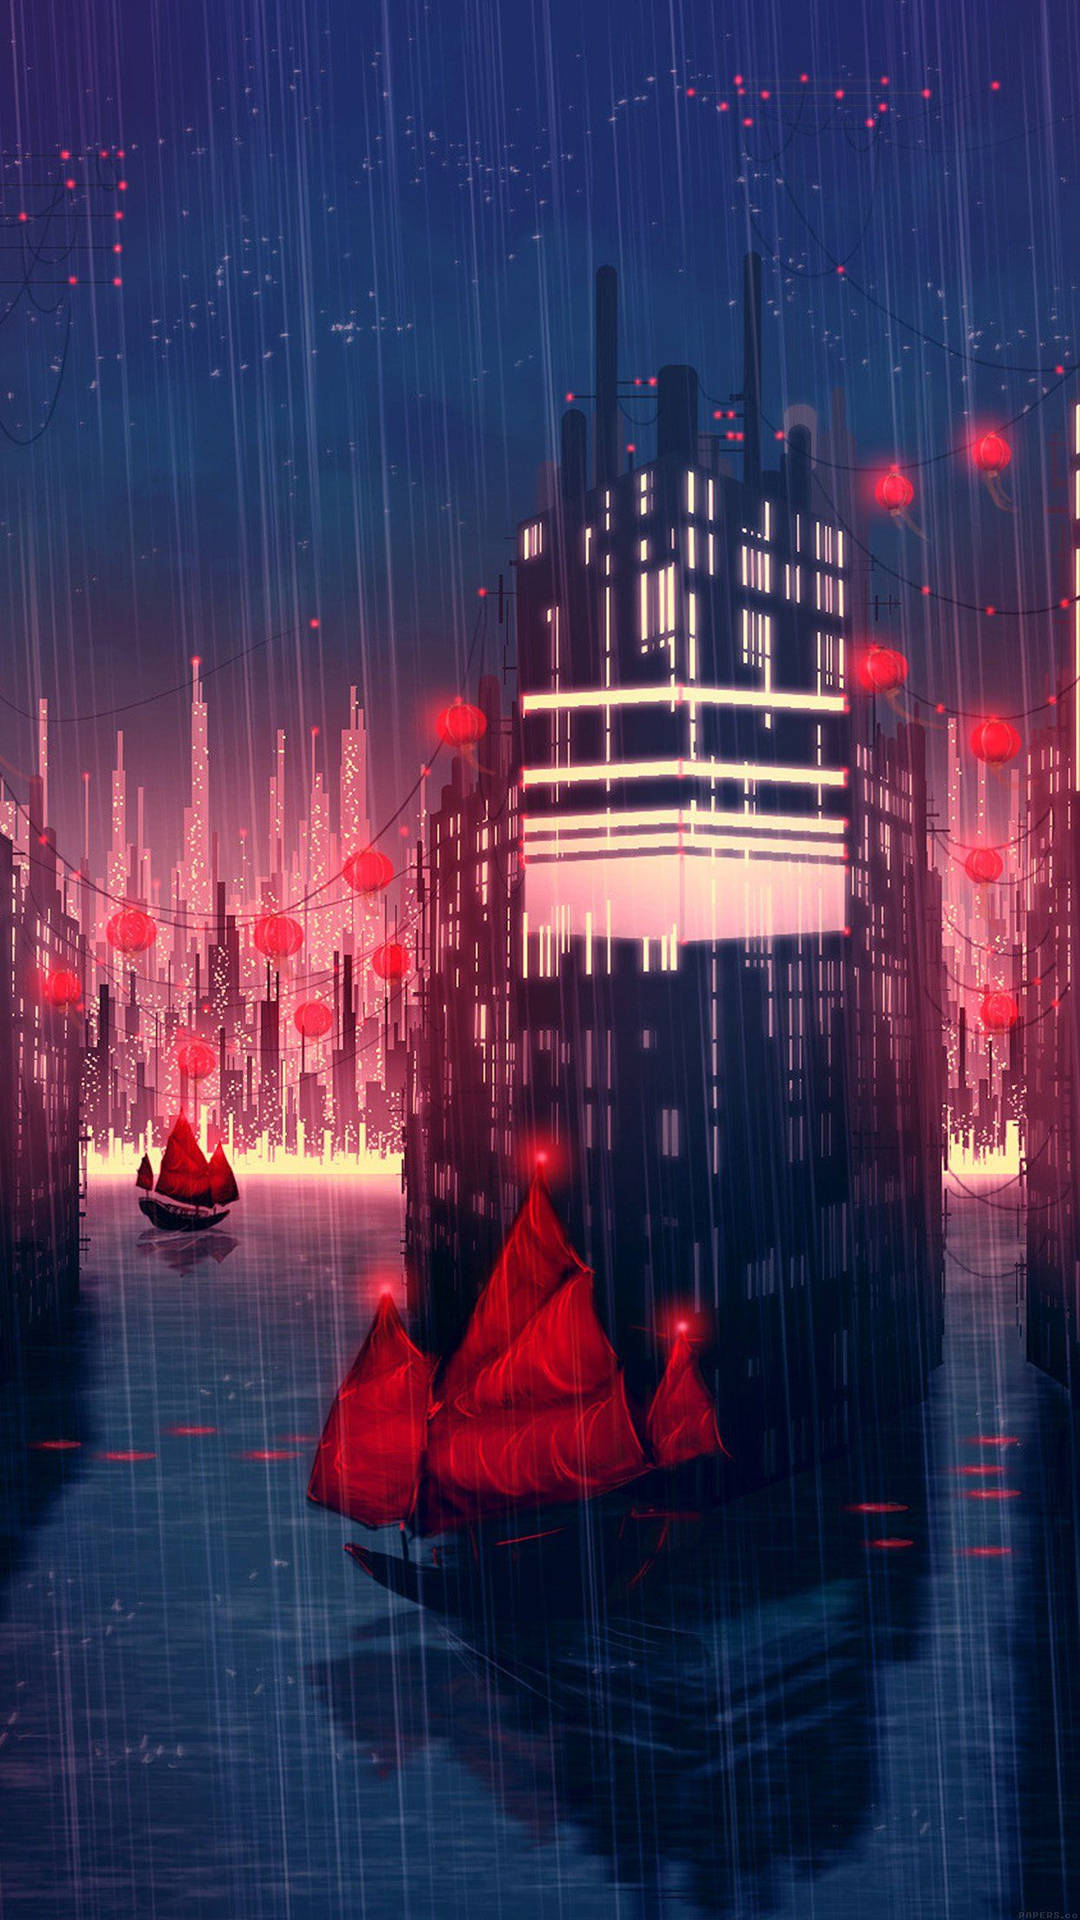 An anime city cloaked in rain Wallpaper